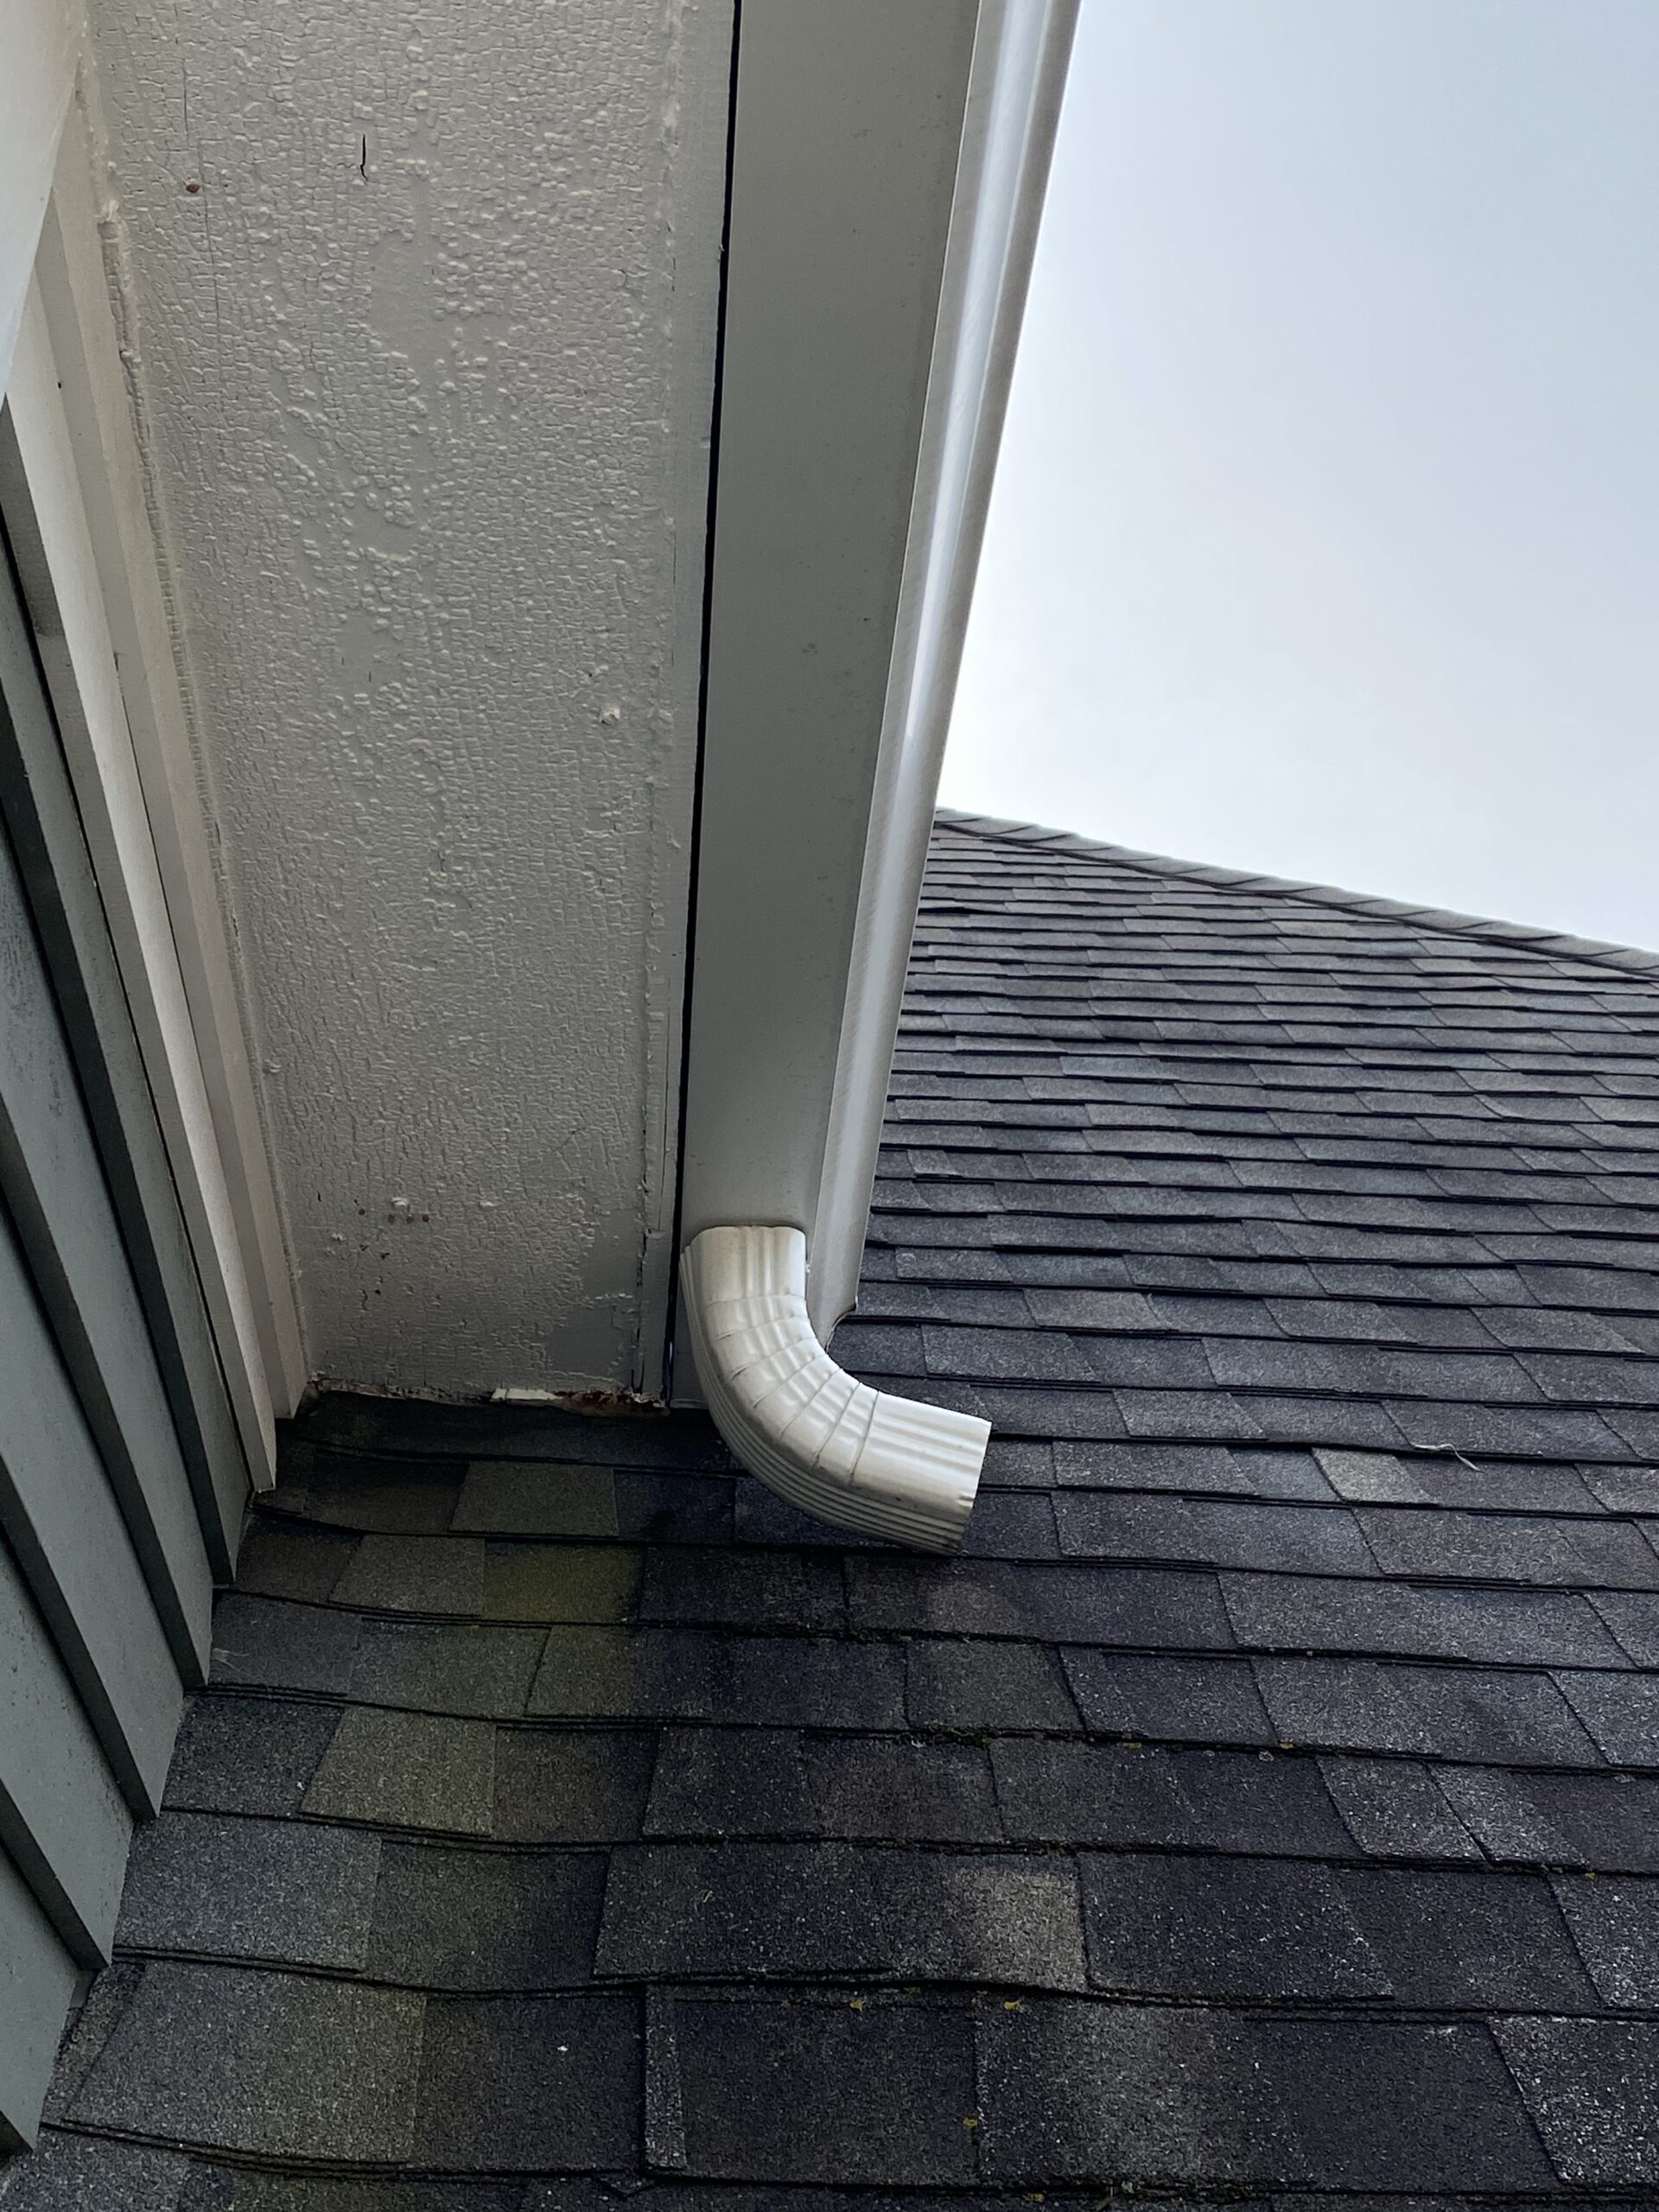 This is a picture of an elbow downspout that is pointing directly to the side of the shingle